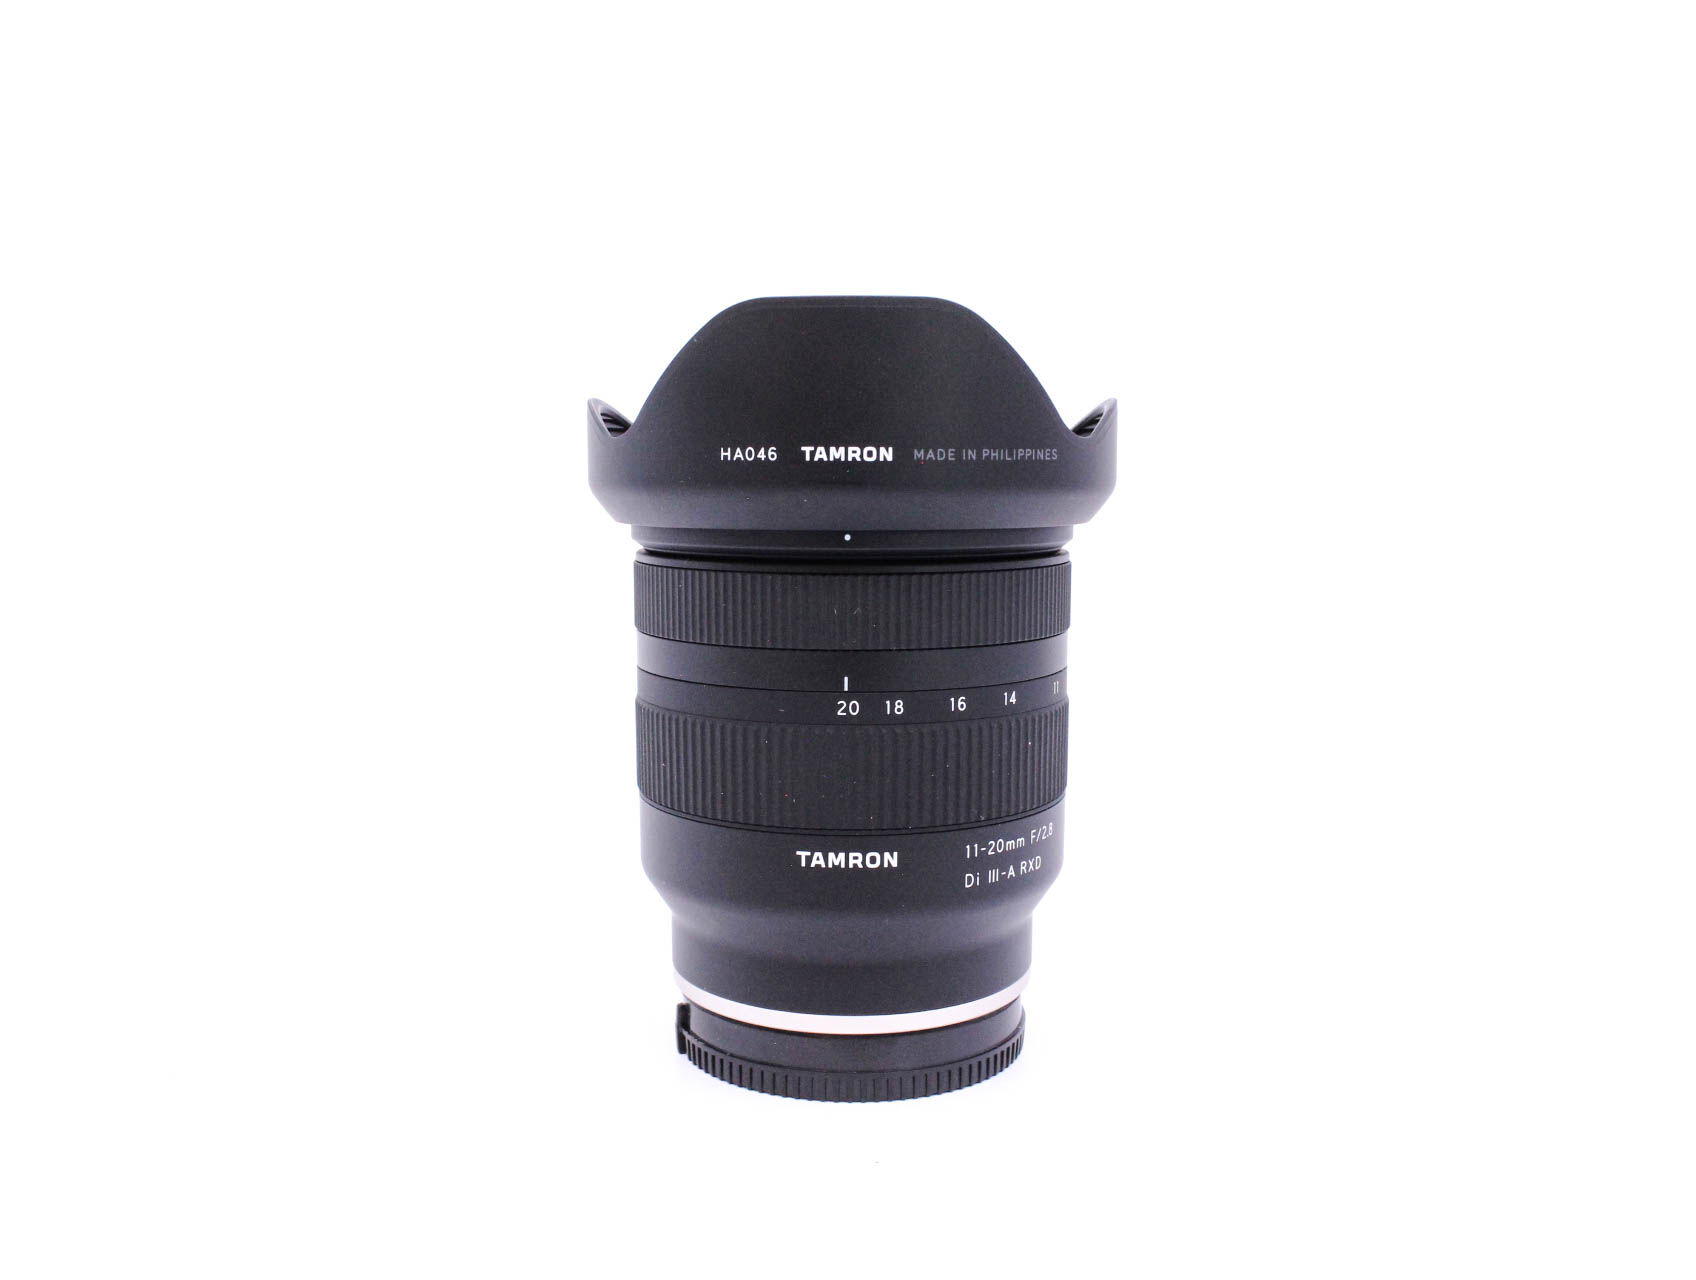 Used Tamron 11-20mm f/2.8 Di III-A RXD - Sony E Fit